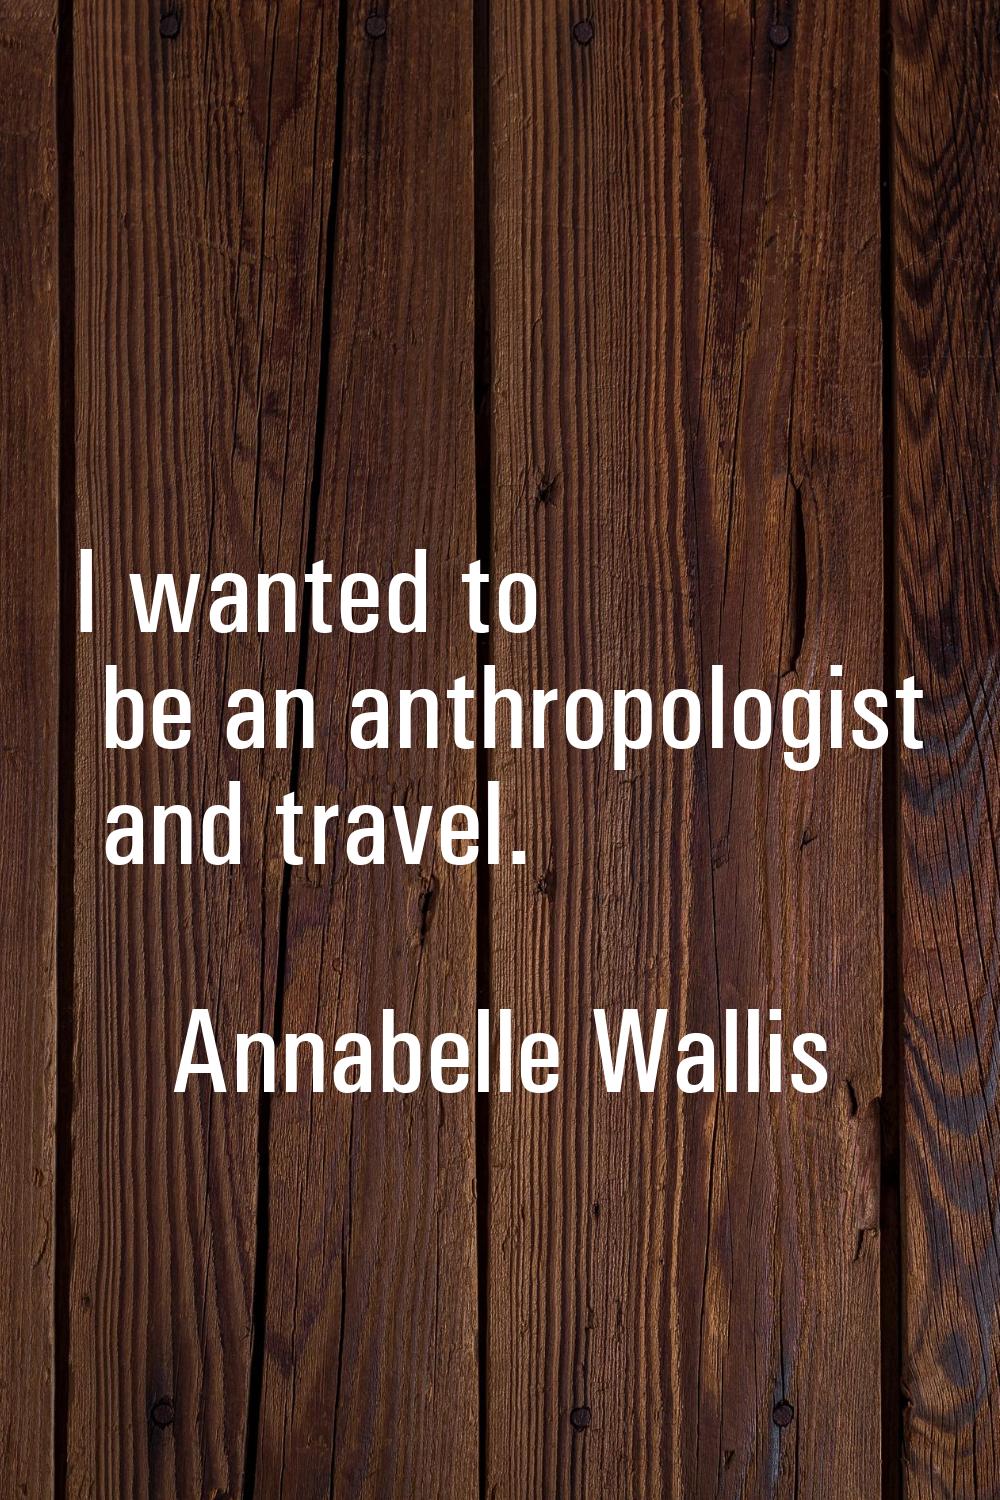 I wanted to be an anthropologist and travel.